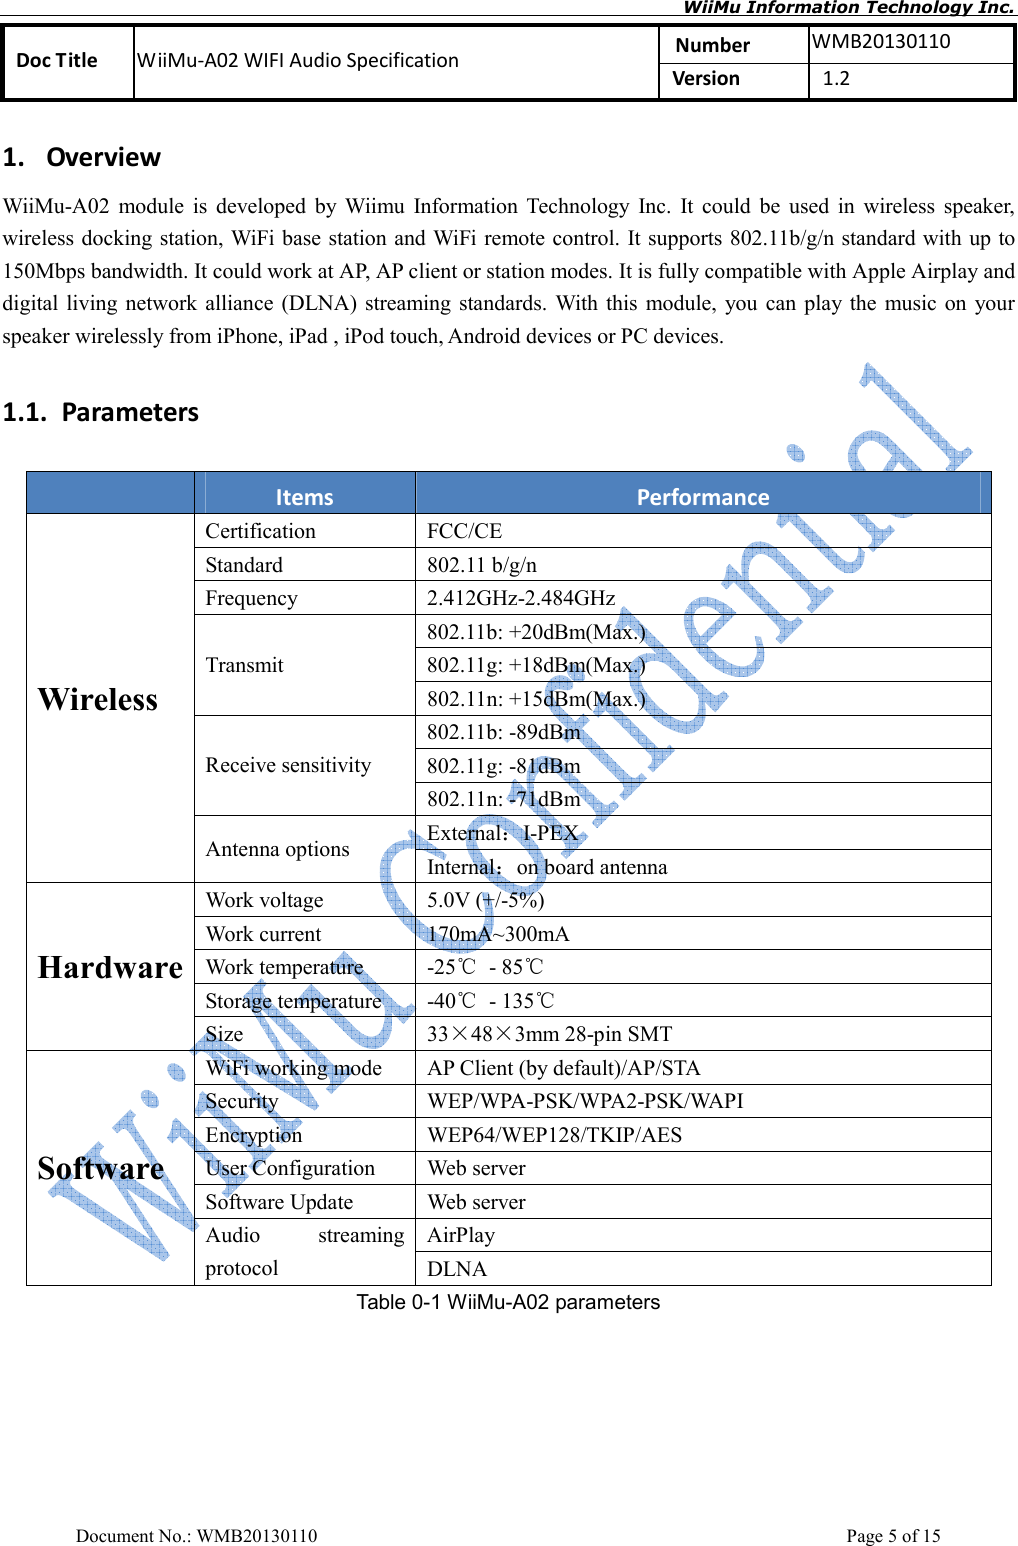       WiiMu Information Technology Inc. Number  WMB20130110 Doc Title  WiiMu-A02 WIFI Audio Specification  Version    1.2  Document No.: WMB20130110    Page 5 of 15 1. Overview WiiMu-A02  module  is  developed  by  Wiimu  Information  Technology  Inc.  It  could  be  used  in  wireless  speaker, wireless docking station, WiFi base station and WiFi remote control. It supports 802.11b/g/n standard with up to 150Mbps bandwidth. It could work at AP, AP client or station modes. It is fully compatible with Apple Airplay and digital living  network alliance  (DLNA) streaming standards. With this  module,  you can  play the  music on  your speaker wirelessly from iPhone, iPad , iPod touch, Android devices or PC devices.   1.1. Parameters  Items  Performance Certification  FCC/CE Standard  802.11 b/g/n Frequency  2.412GHz-2.484GHz 802.11b: +20dBm(Max.) 802.11g: +18dBm(Max.) Transmit 802.11n: +15dBm(Max.) 802.11b: -89dBm 802.11g: -81dBm Receive sensitivity 802.11n: -71dBm ExternalI-PEX   Wireless Antenna options  Internalon board antenna Work voltage  5.0V (+/-5%) Work current  170mA~300mA Work temperature  -25  - 85 Storage temperature  -40  - 135 Hardware Size  33×48×3mm 28-pin SMT WiFi working mode  AP Client (by default)/AP/STA   Security  WEP/WPA-PSK/WPA2-PSK/WAPI Encryption  WEP64/WEP128/TKIP/AES User Configuration    Web server Software Update  Web server AirPlay   Software Audio  streaming protocol  DLNA Table 0-1 WiiMu-A02 parameters  